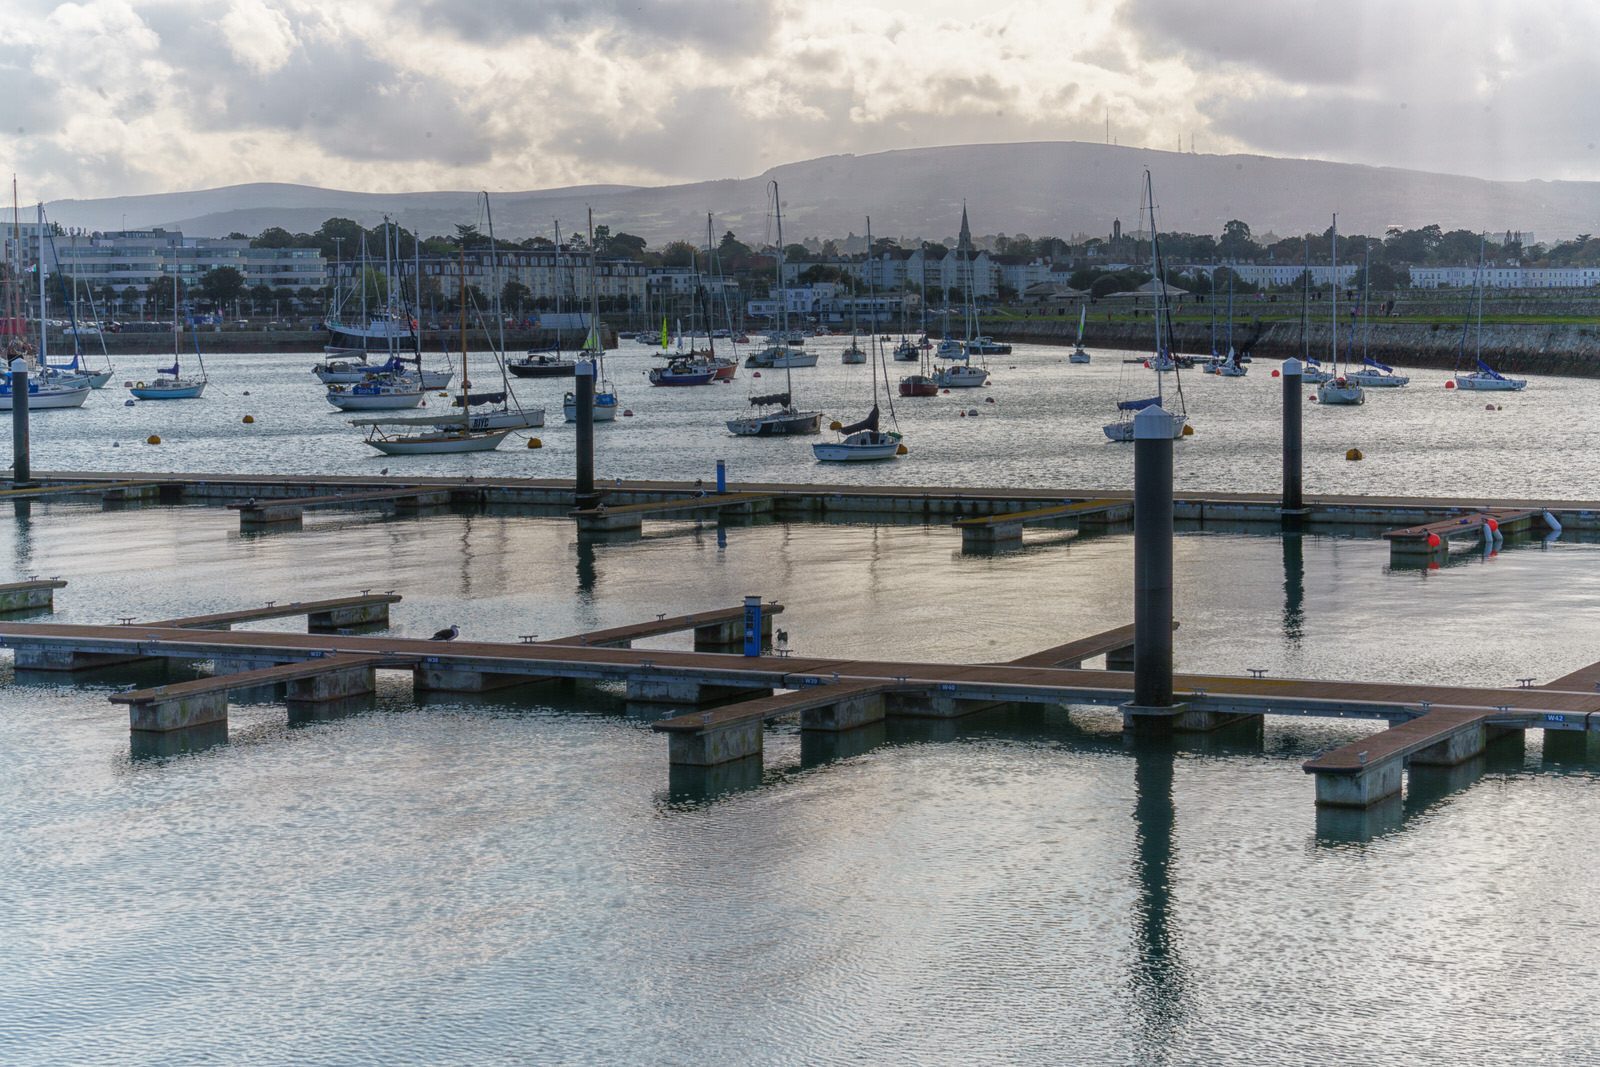 THE SECTION OF THE MARINA NEAR THE WESTERN BREAKWATER [DUN LAOGHAIRE HARBOUR] 004